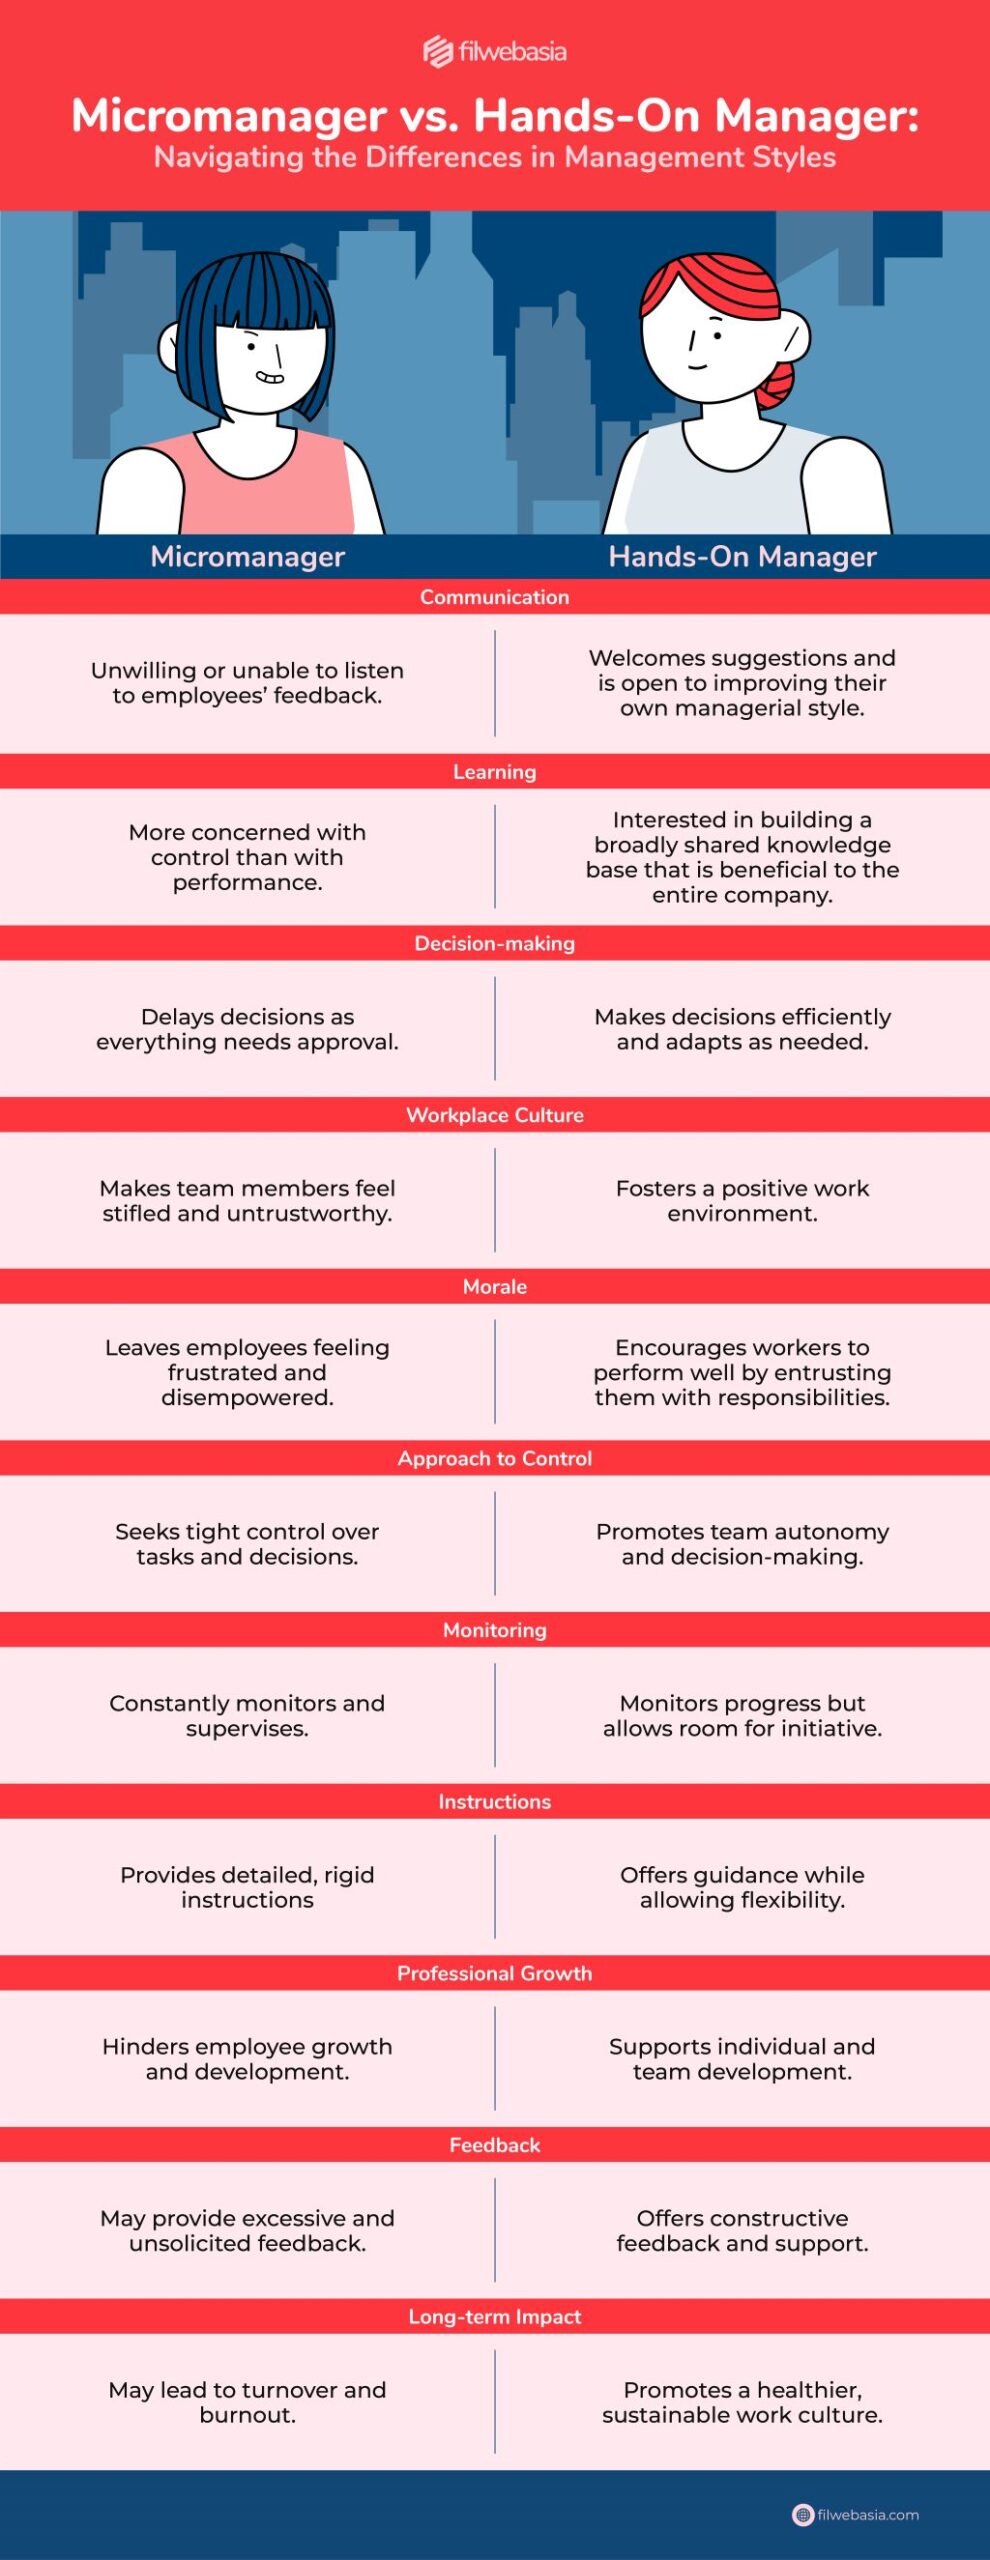 Infographic about how micromanagers differ from hands-on managers